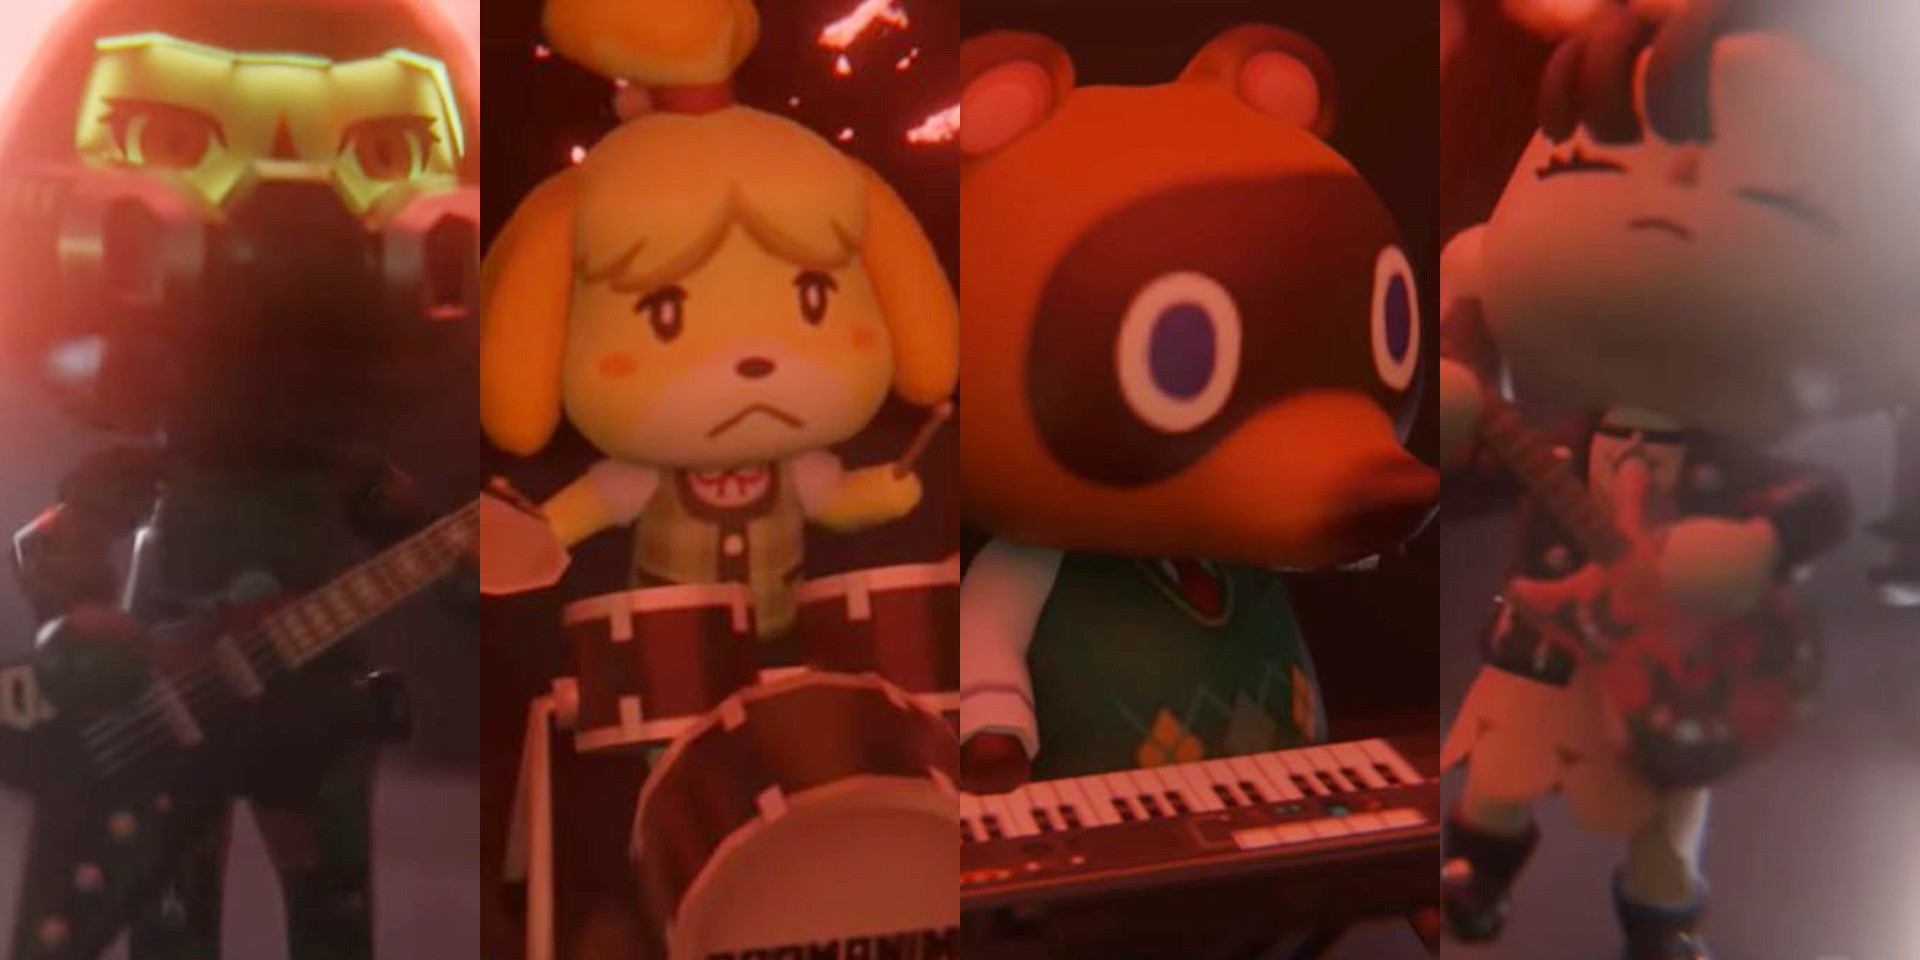 This is what happens when Doom and Animal Crossing come together to form a heavy metal band – watch